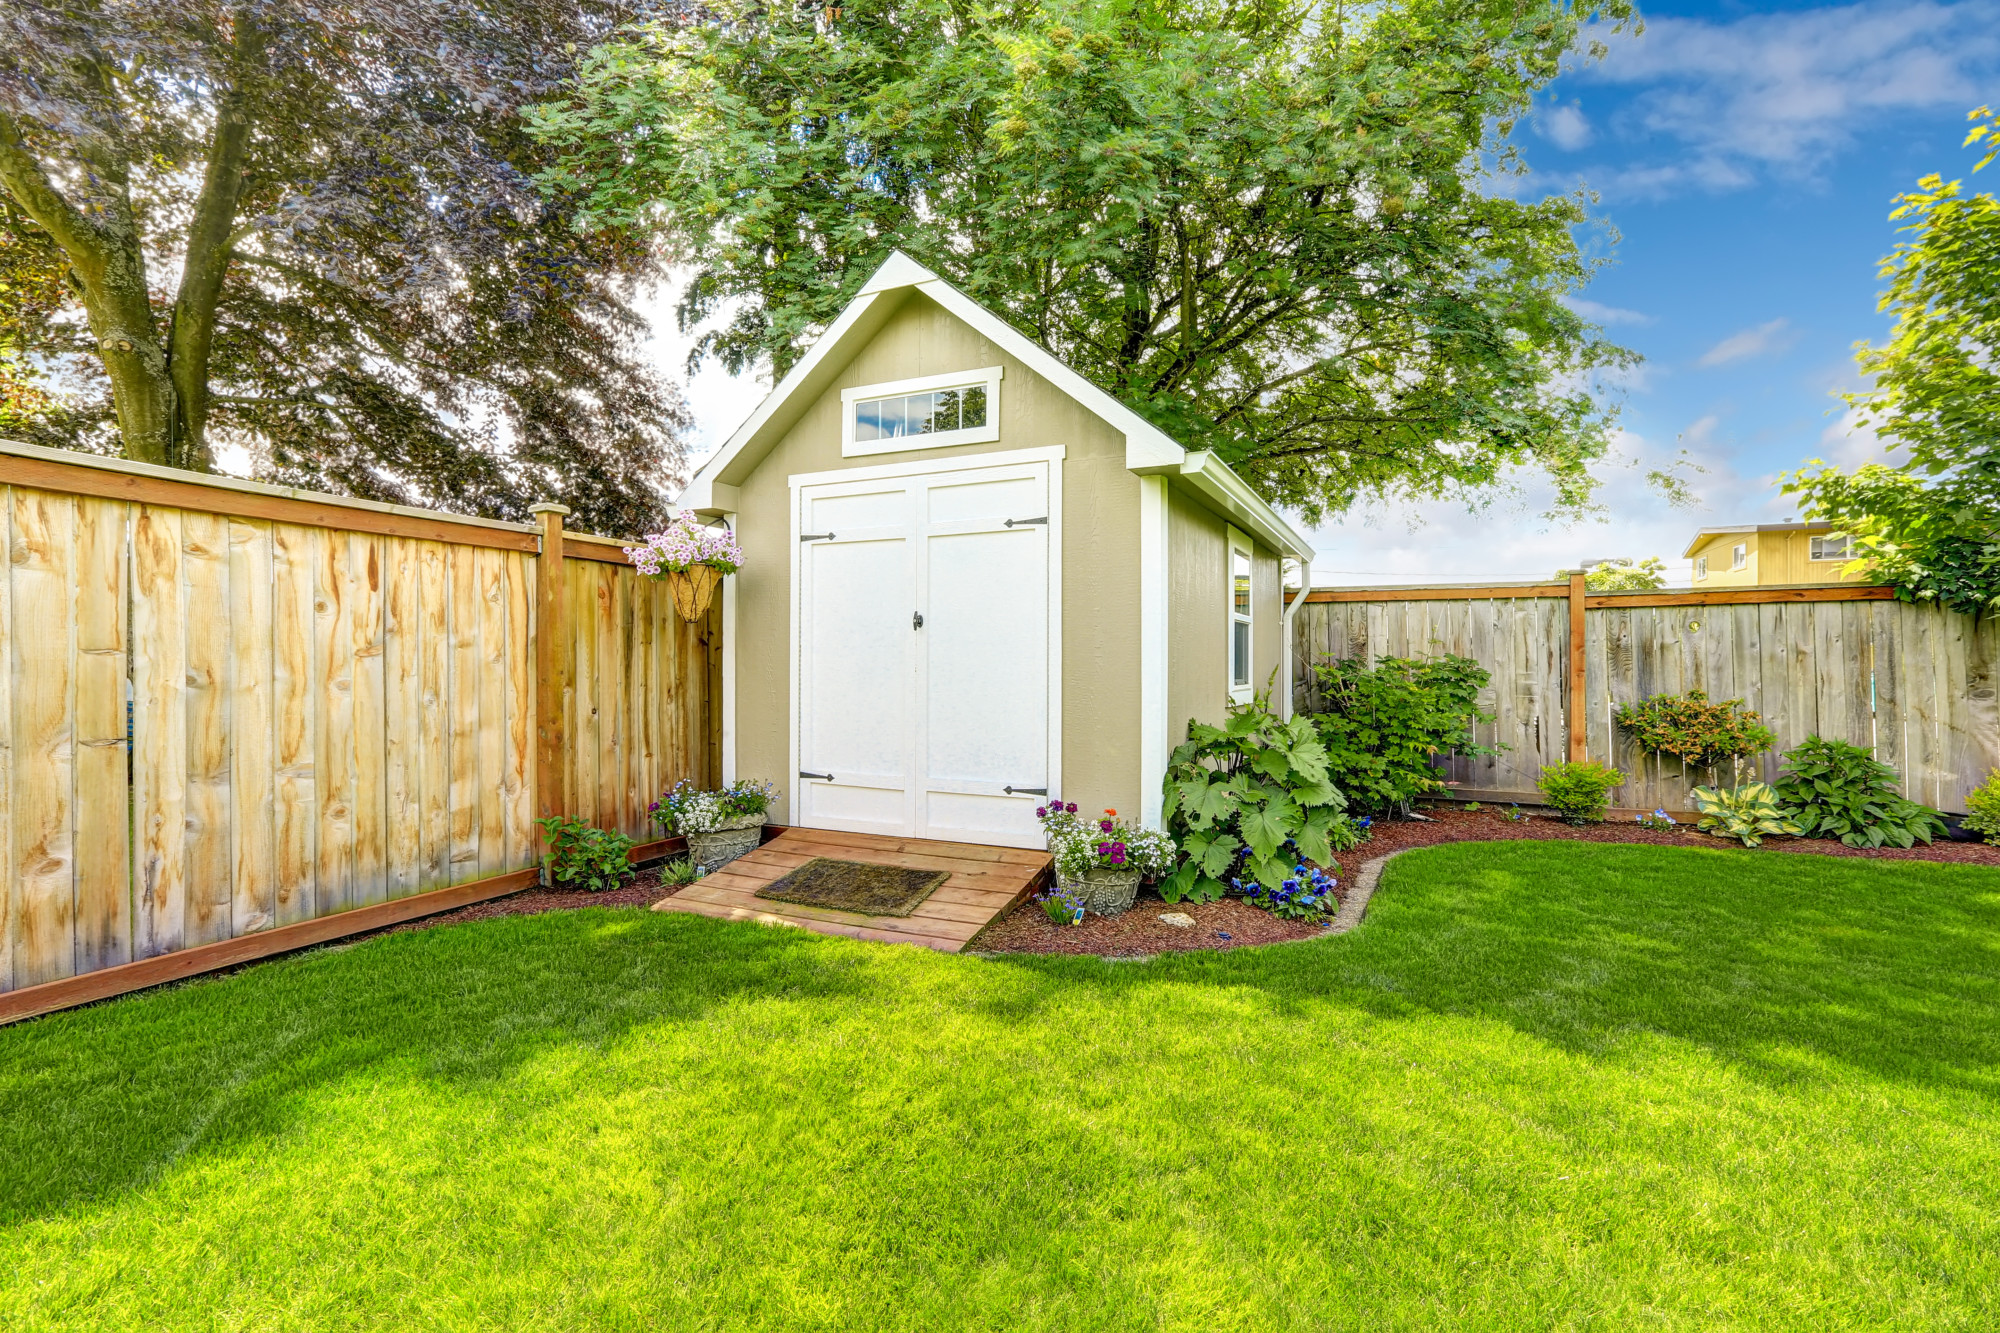 Outdoor wood storage sheds: are you planning to buy an outdoor storage shed? Do you want to know about the benefits of owning one? Read on to learn more.